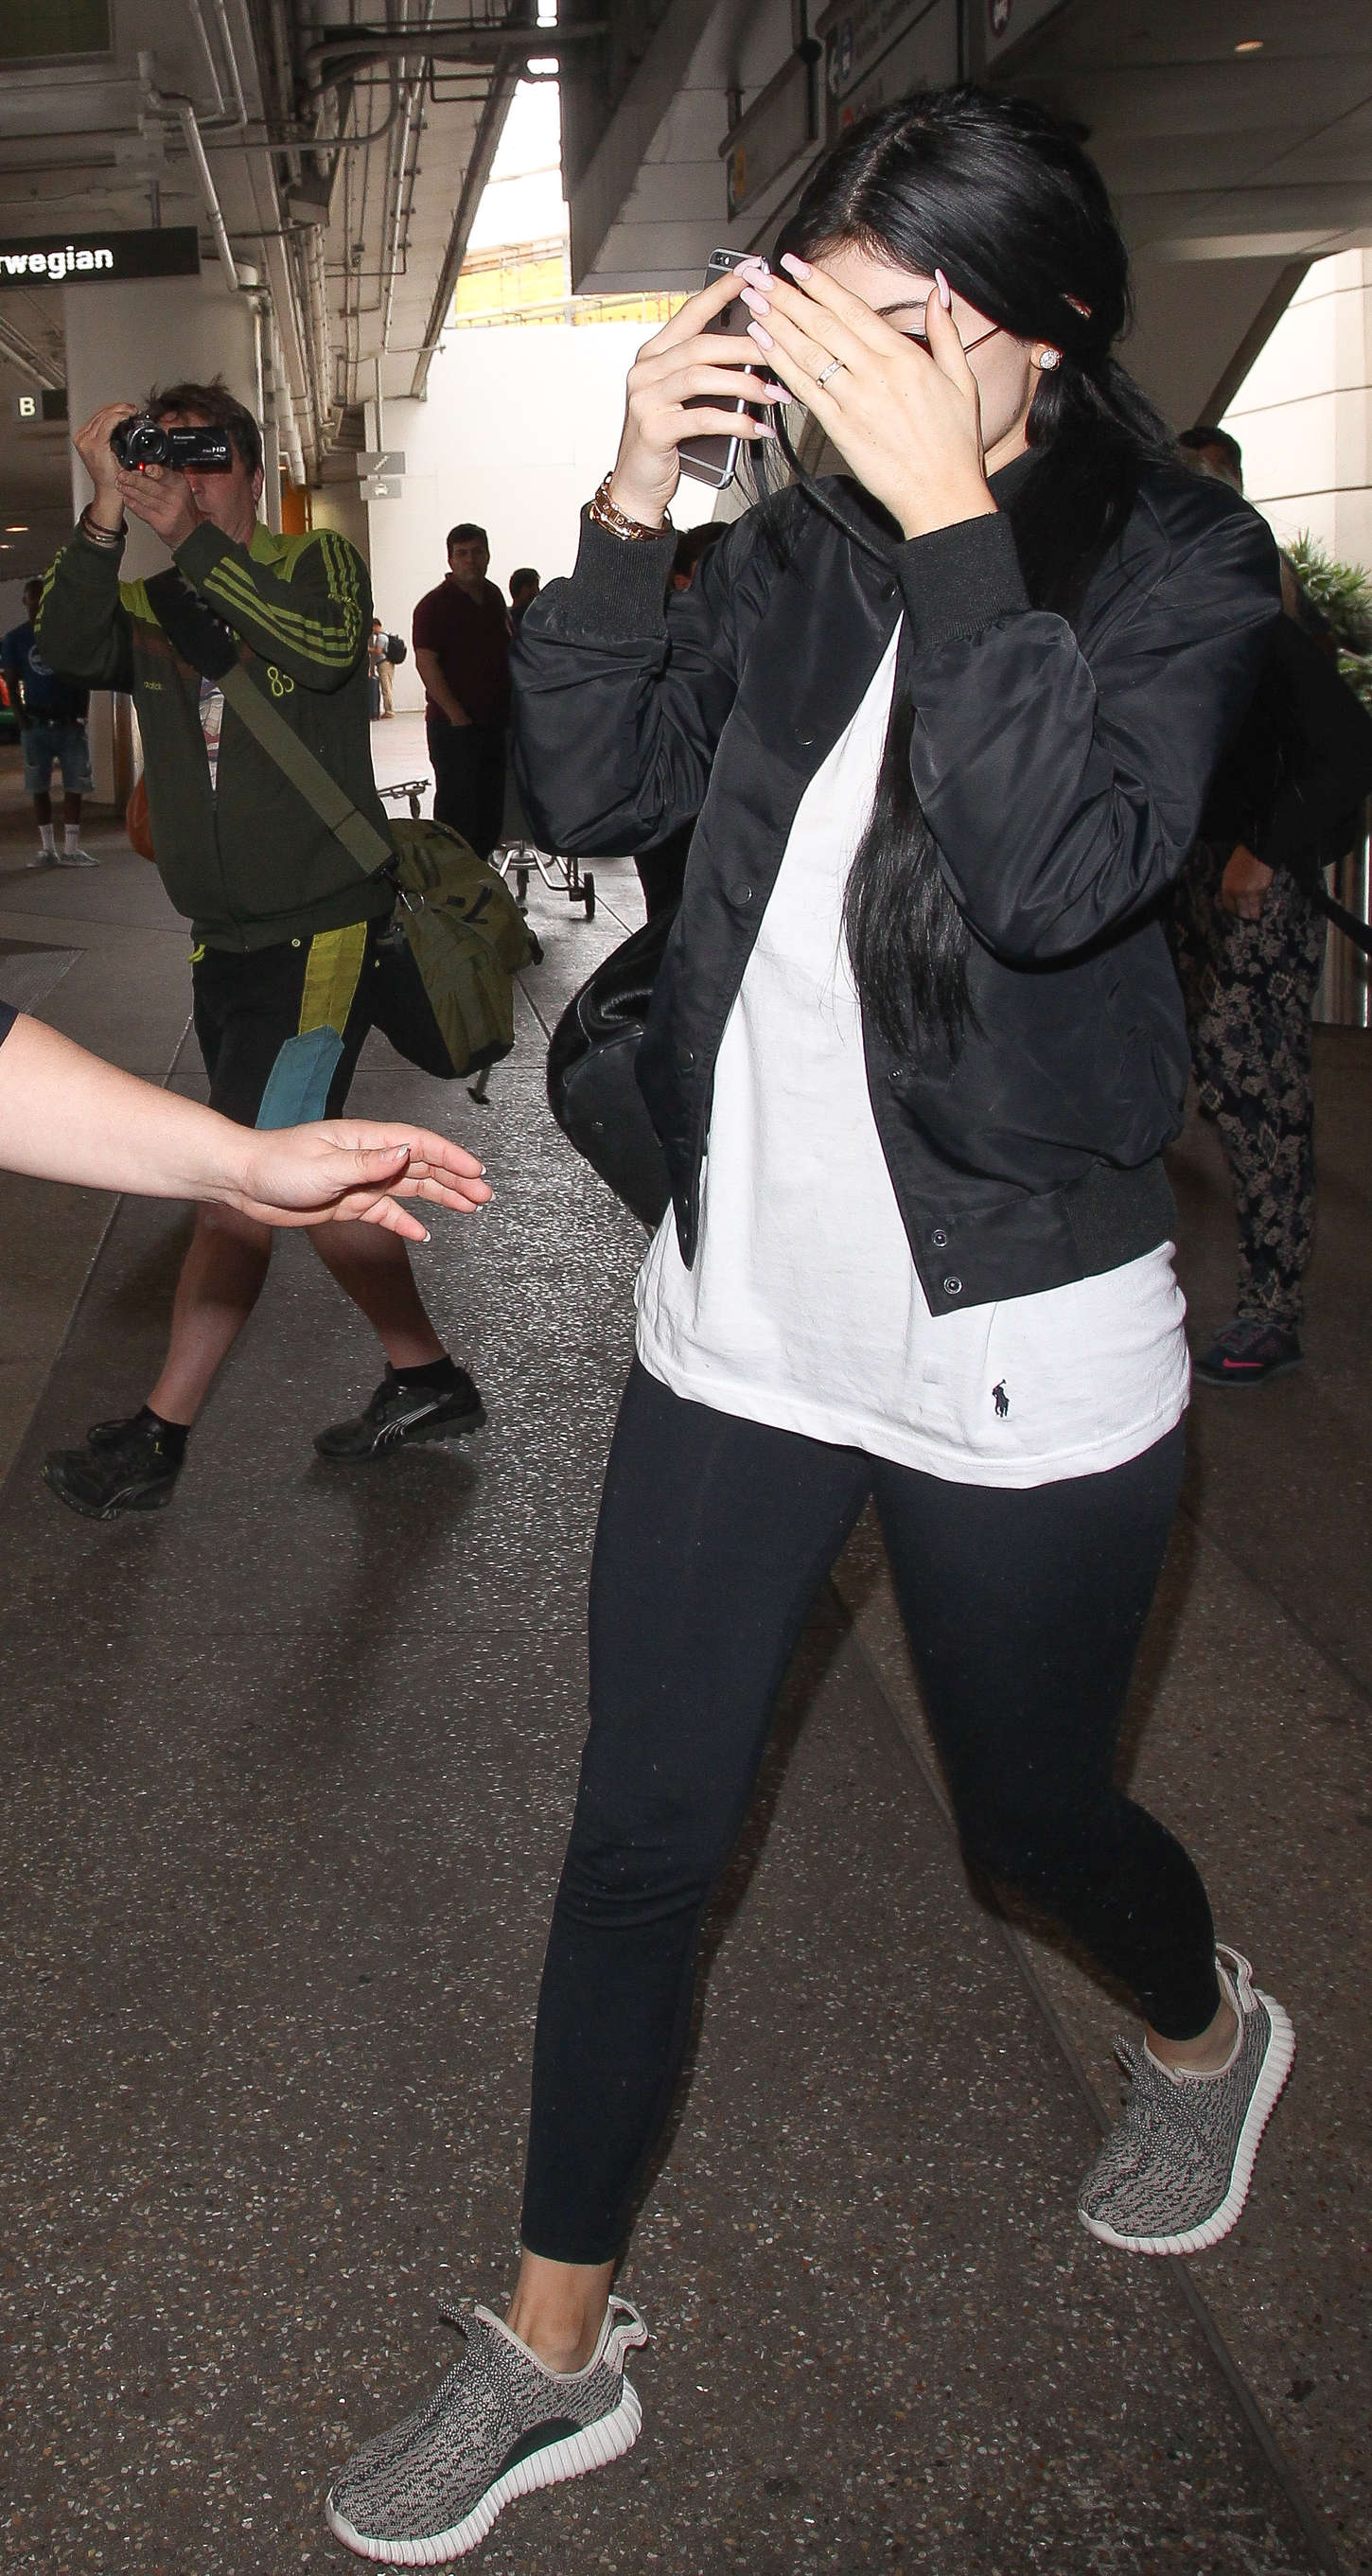 Kylie Jenner in Tights at LAX airport in LA